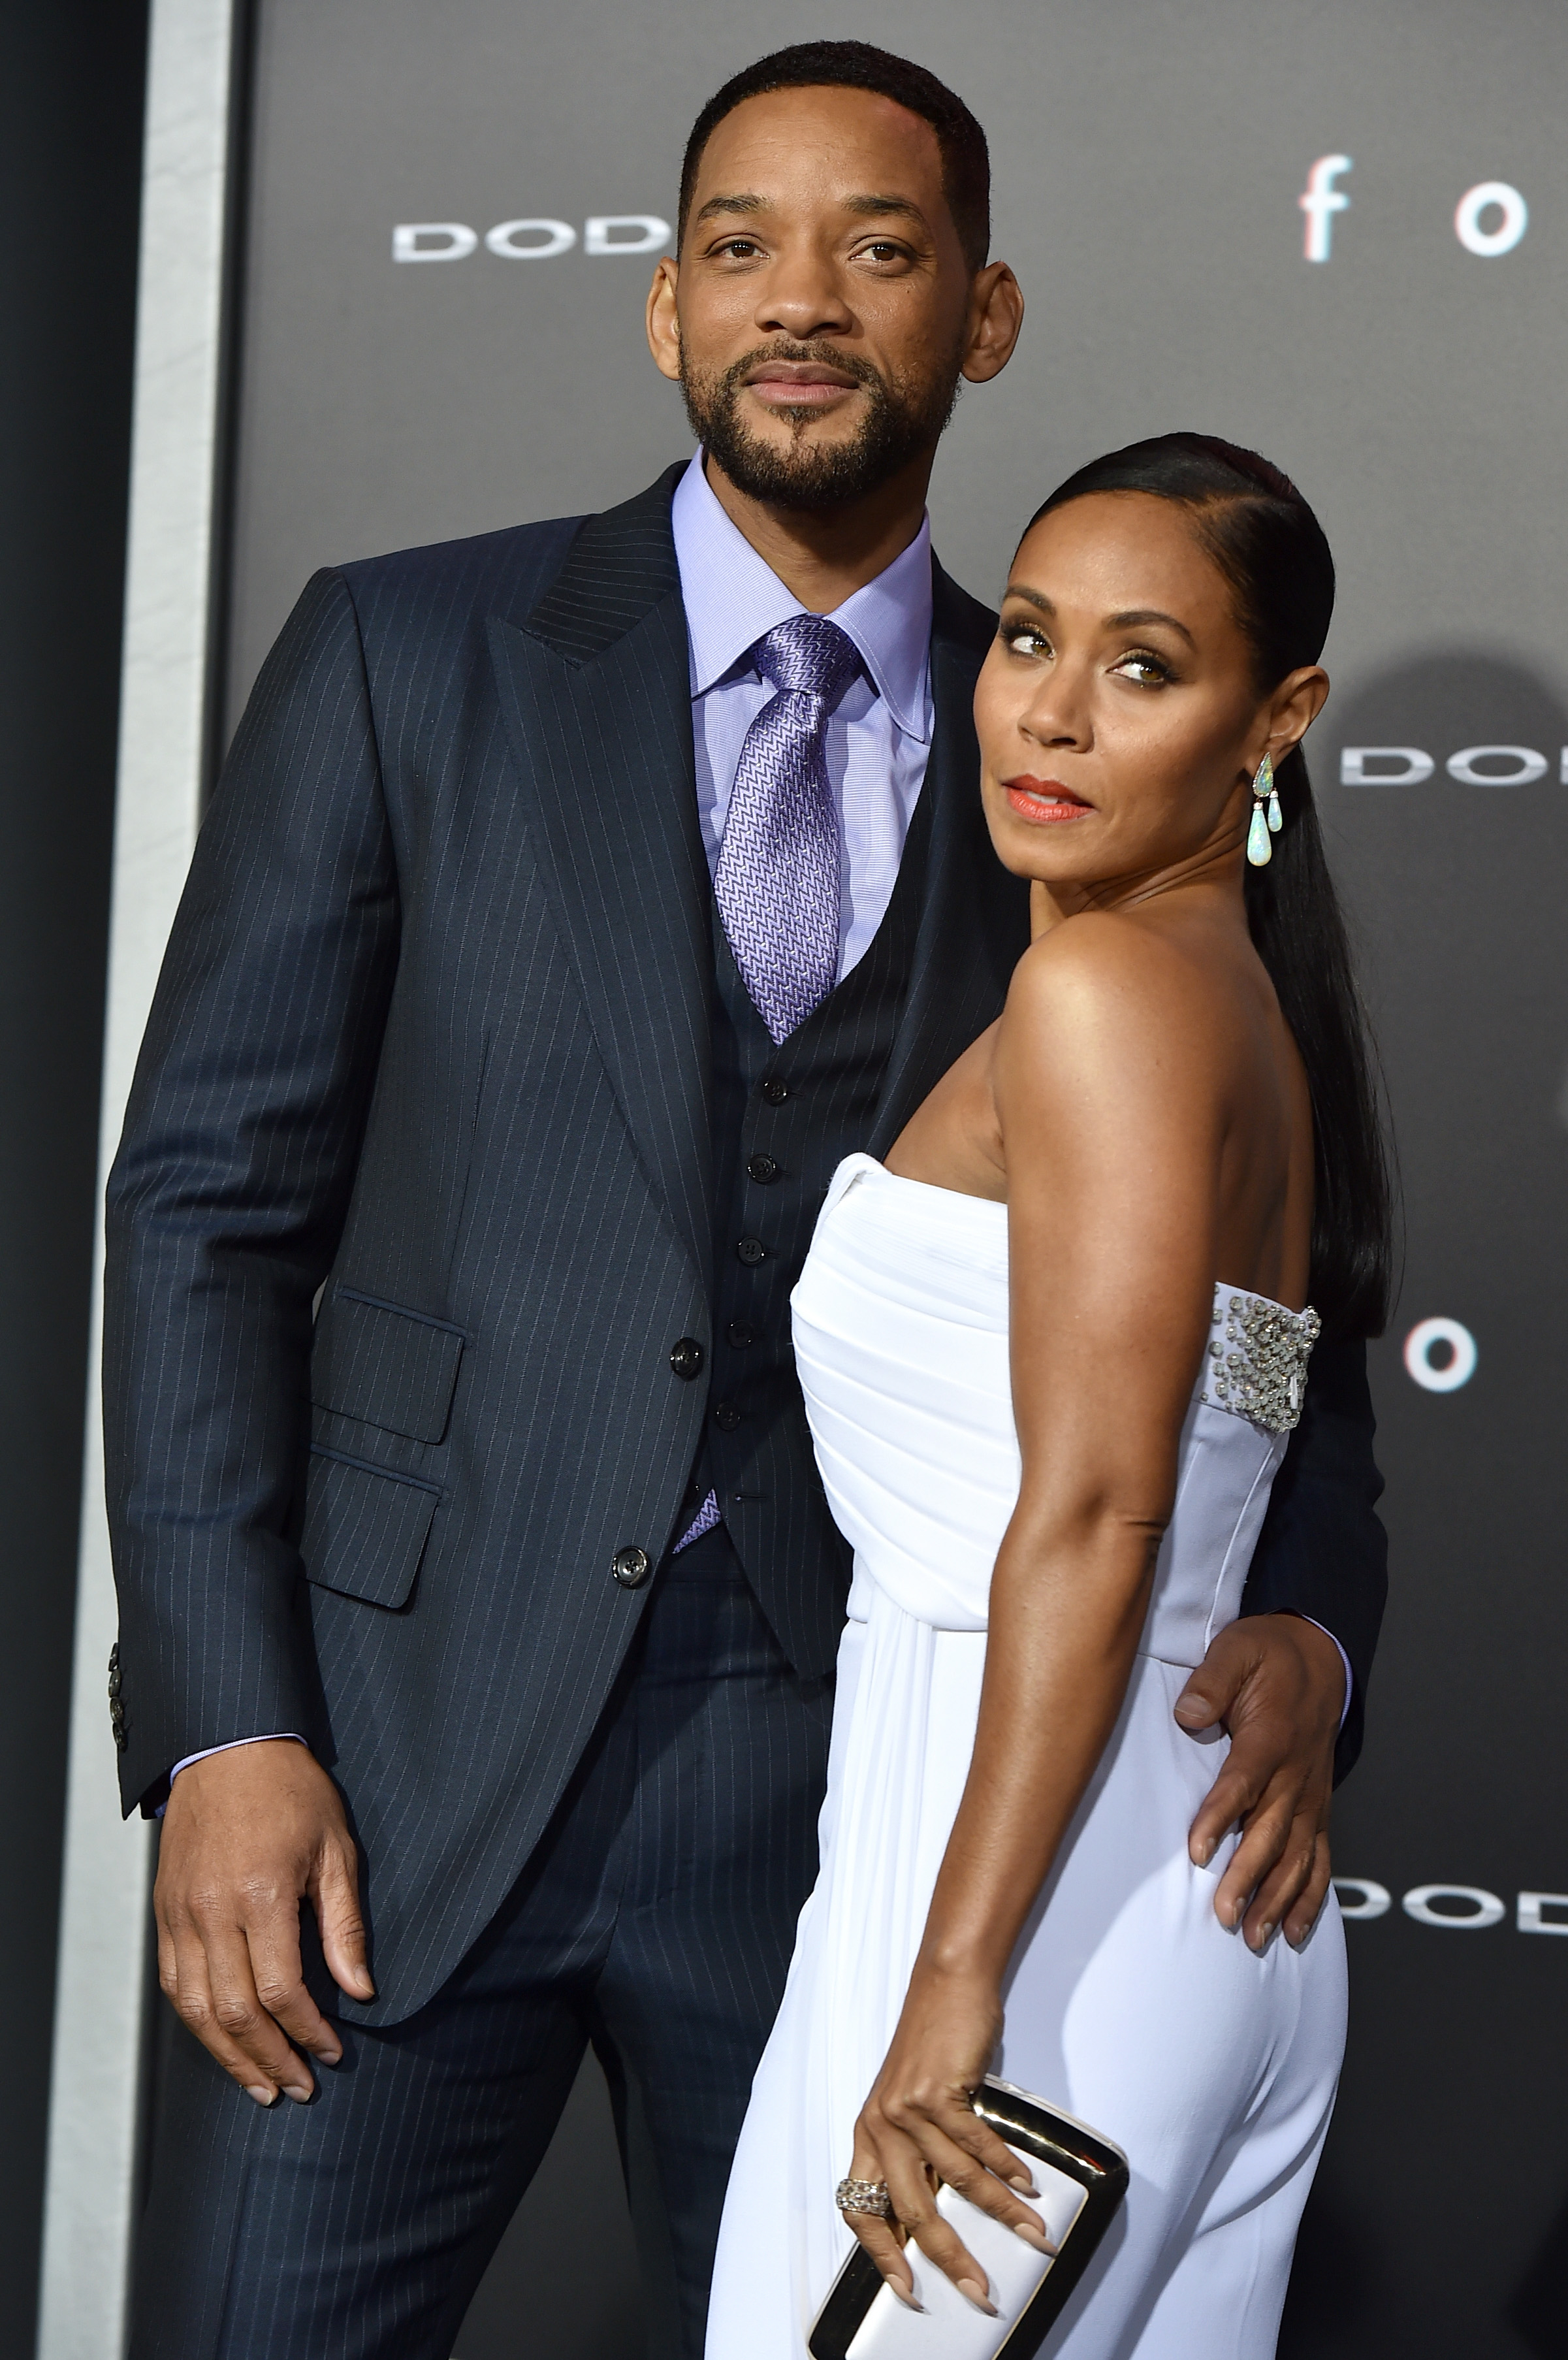 Close-up of Will and Jada at a media event